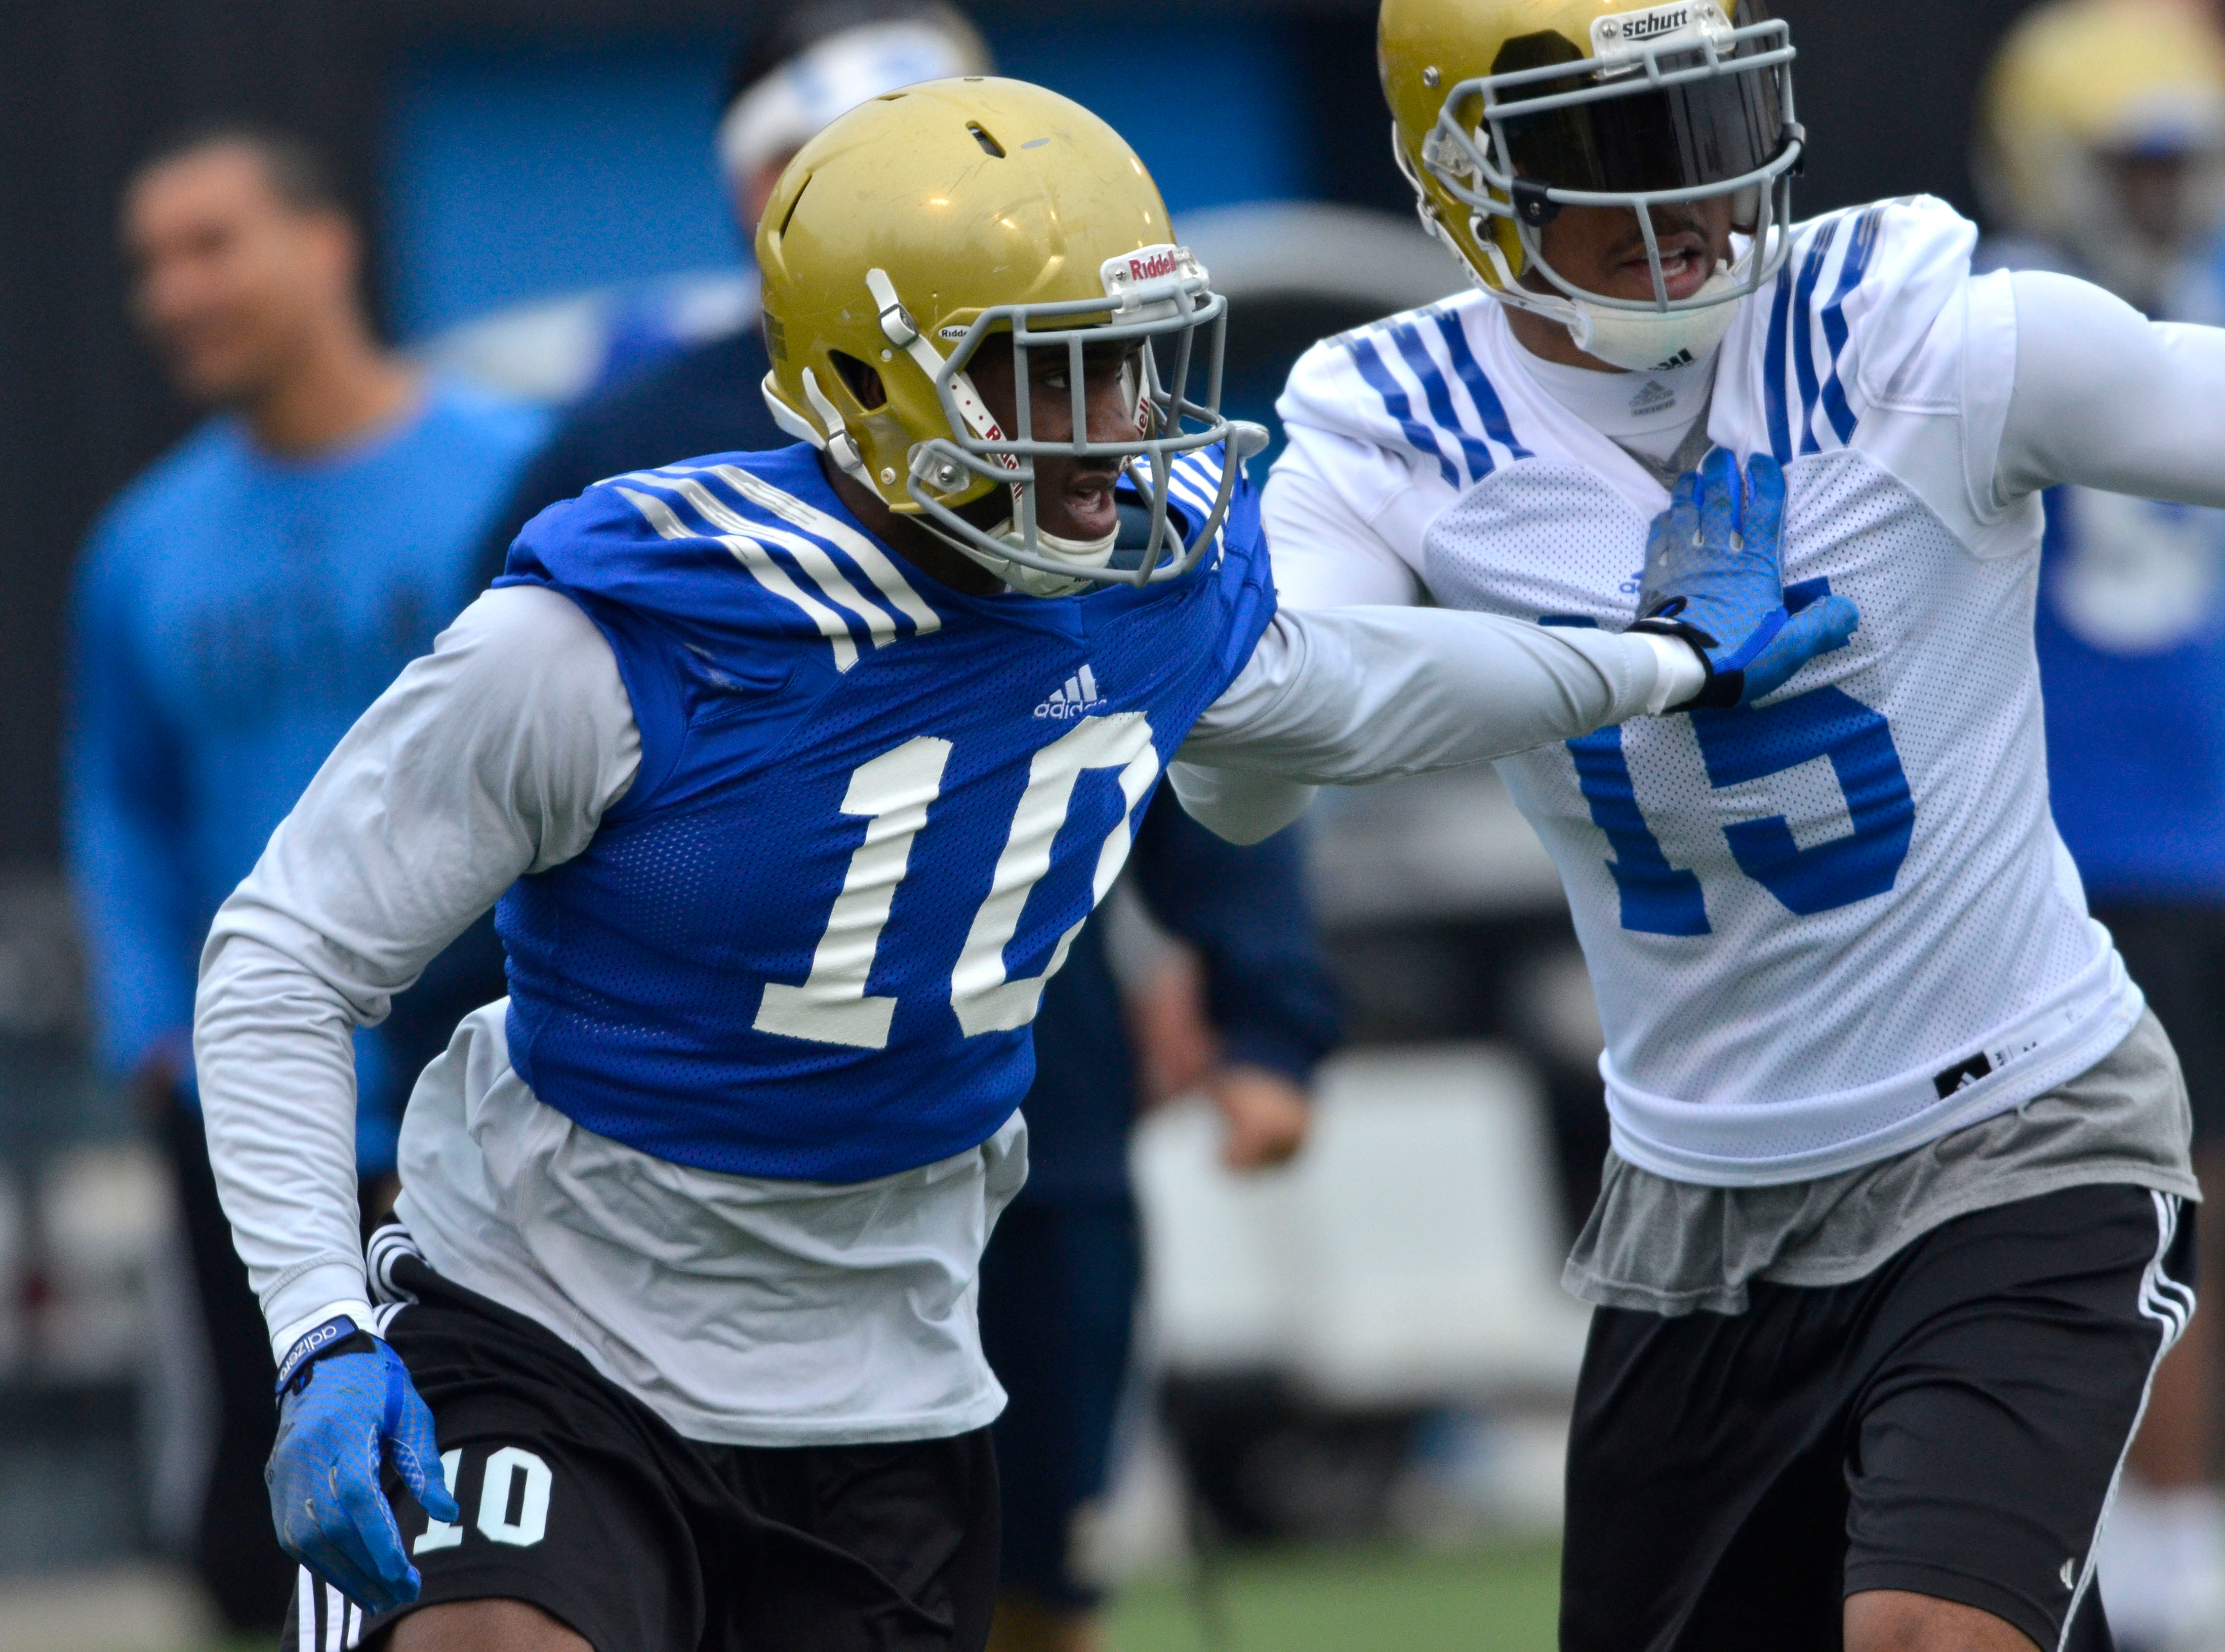 UCLA cornerback Fabian Moreau (10) will help represent the Bruins at Pac-12 Media Days. He is pictured here defending former UCLA receiver Devin Lucien during spring practice on Apr. 16, 2014. (Brad Graverson/Staff)